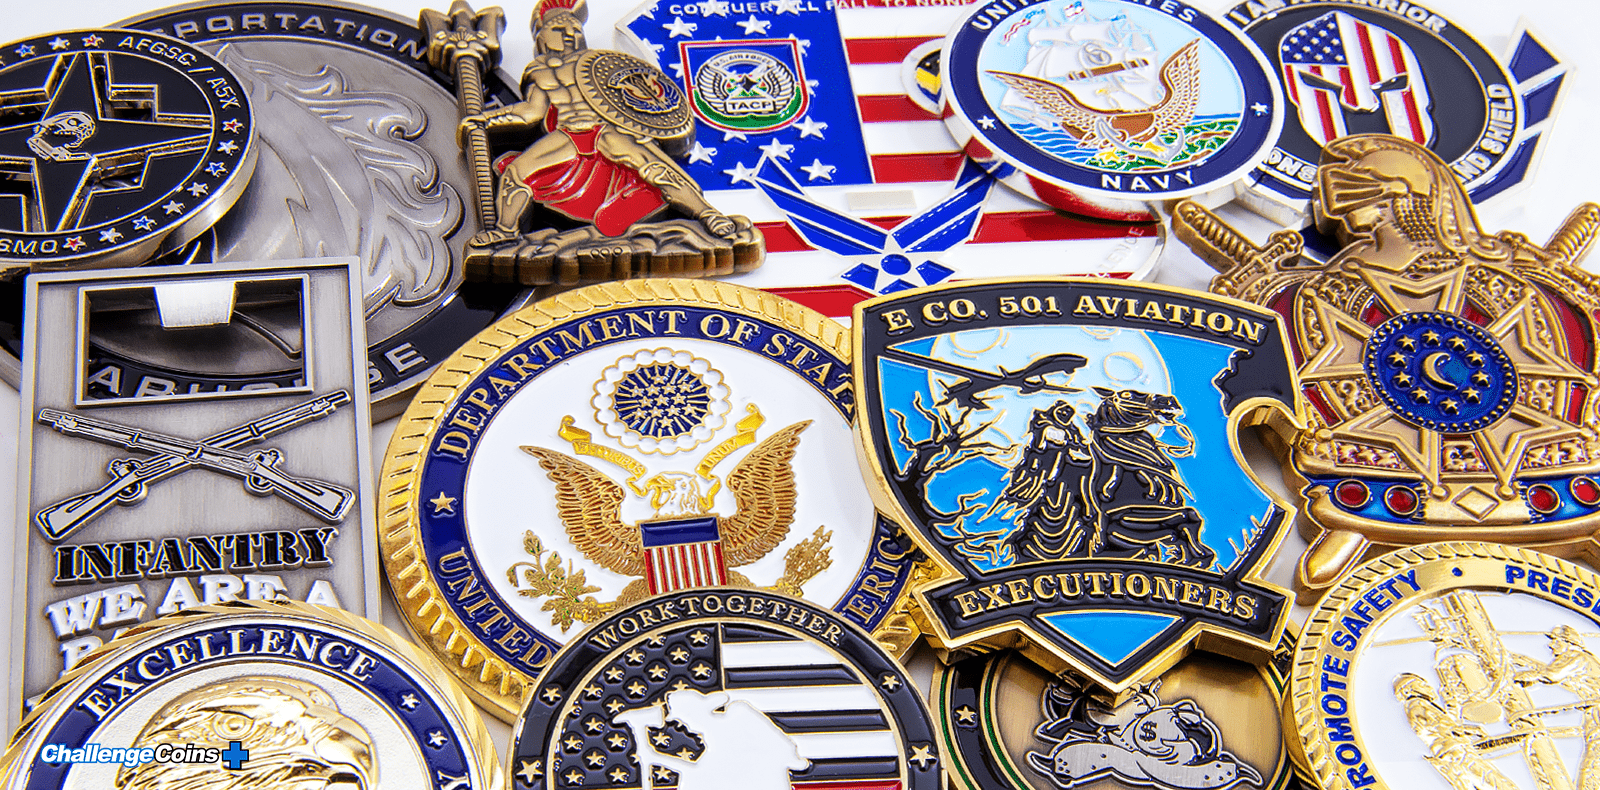 Challenge Coins | Tokens for Recognition and Camaraderie